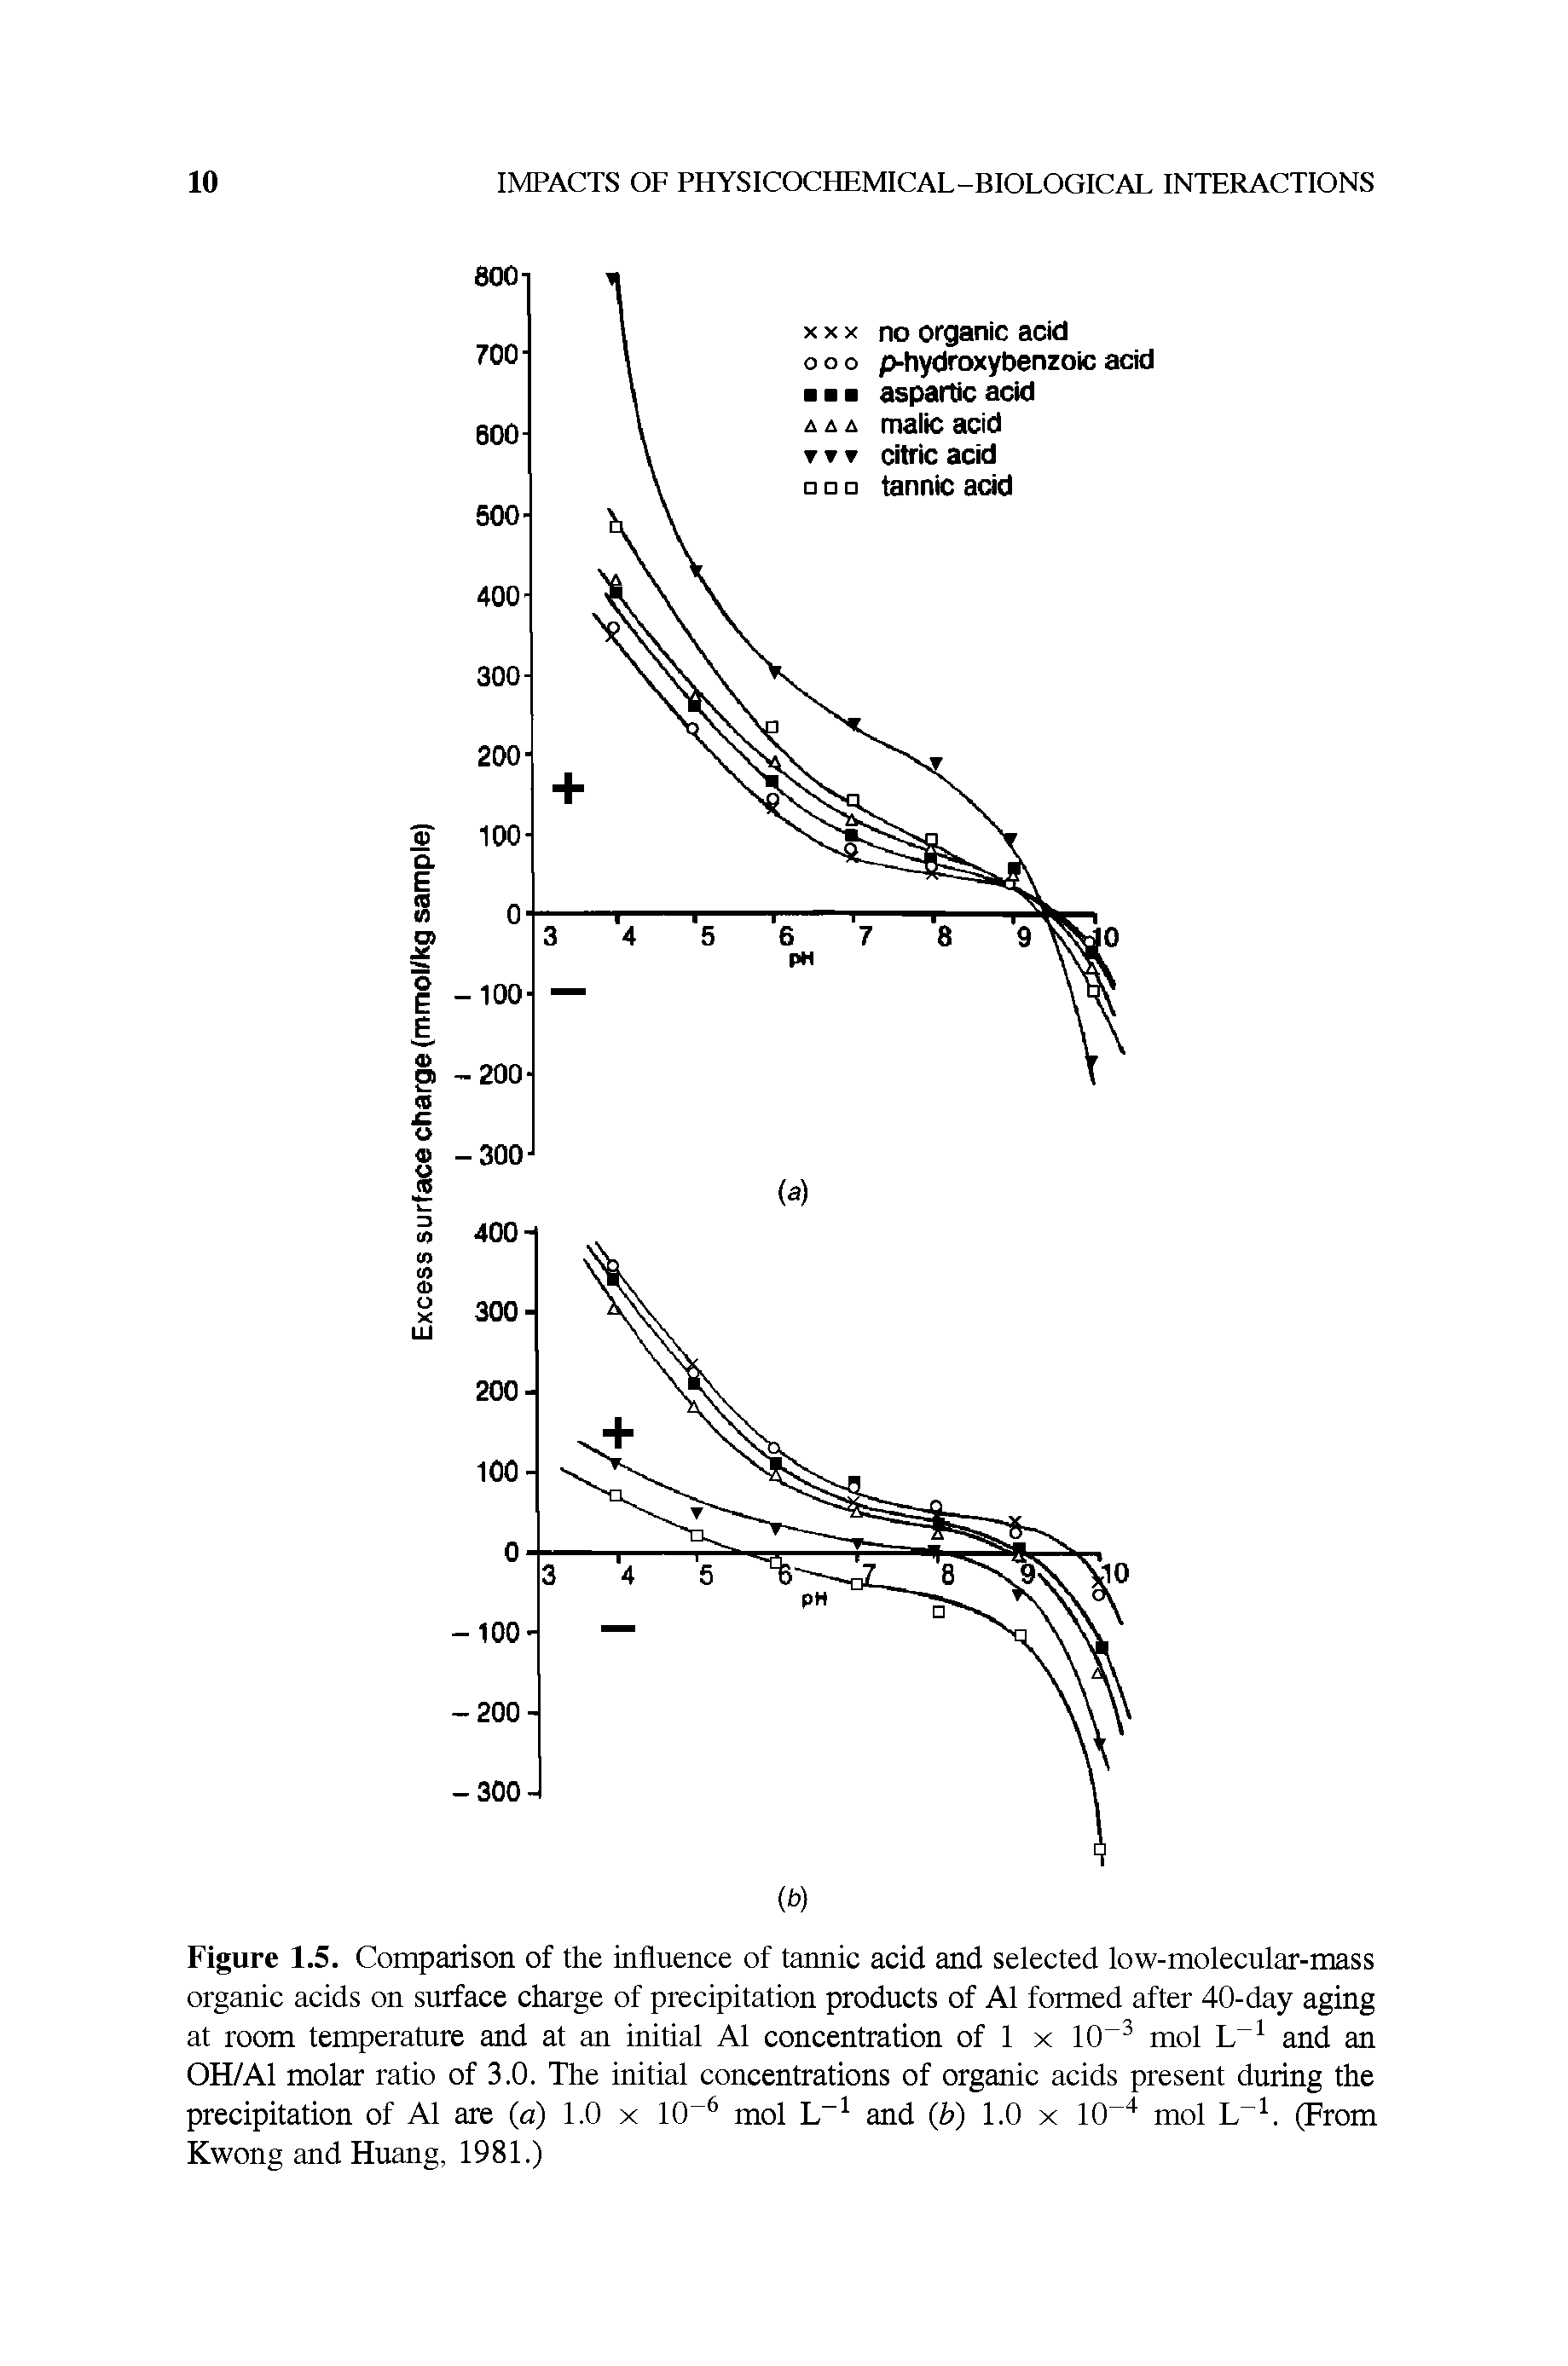 Figure 1.5. Comparison of the influence of tannic acid and selected low-molecular-mass organic acids on surface charge of precipitation products of AI fomied after 40-day aging at room temperature and at an initial AI concentration of 1 x 10 mol L and an OH/Al molar ratio of 3.0. The initial concentrations of organic acids present during the precipitation of Al are (a) 1.0 x 10 mol L and Qj) 1.0 x 10 mol L . (From Kwong and Huang, 1981.)...